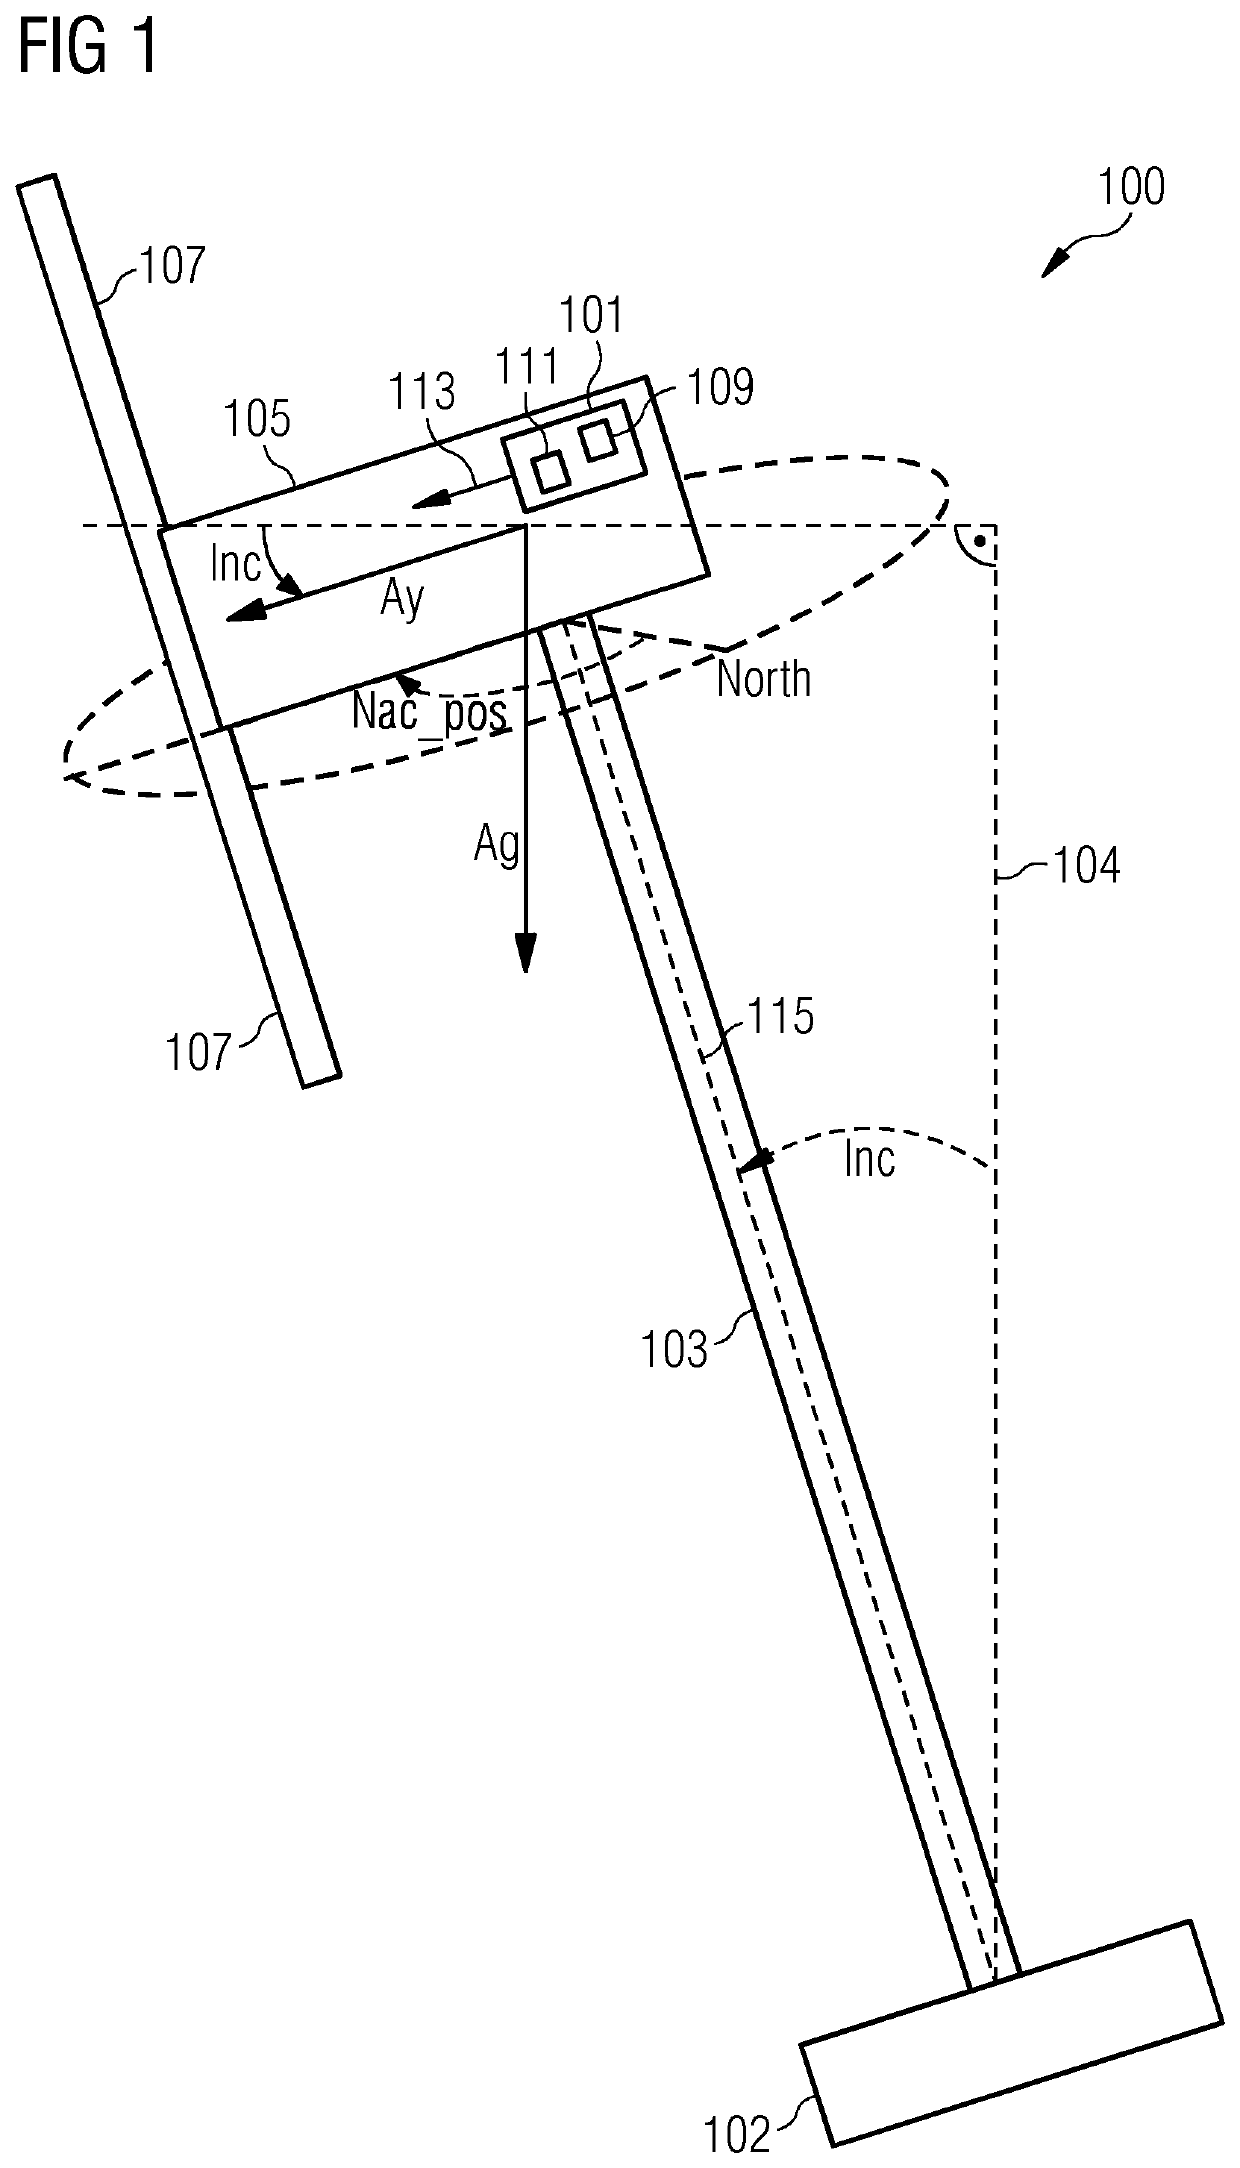 Determining a wind turbine tower inclination angle